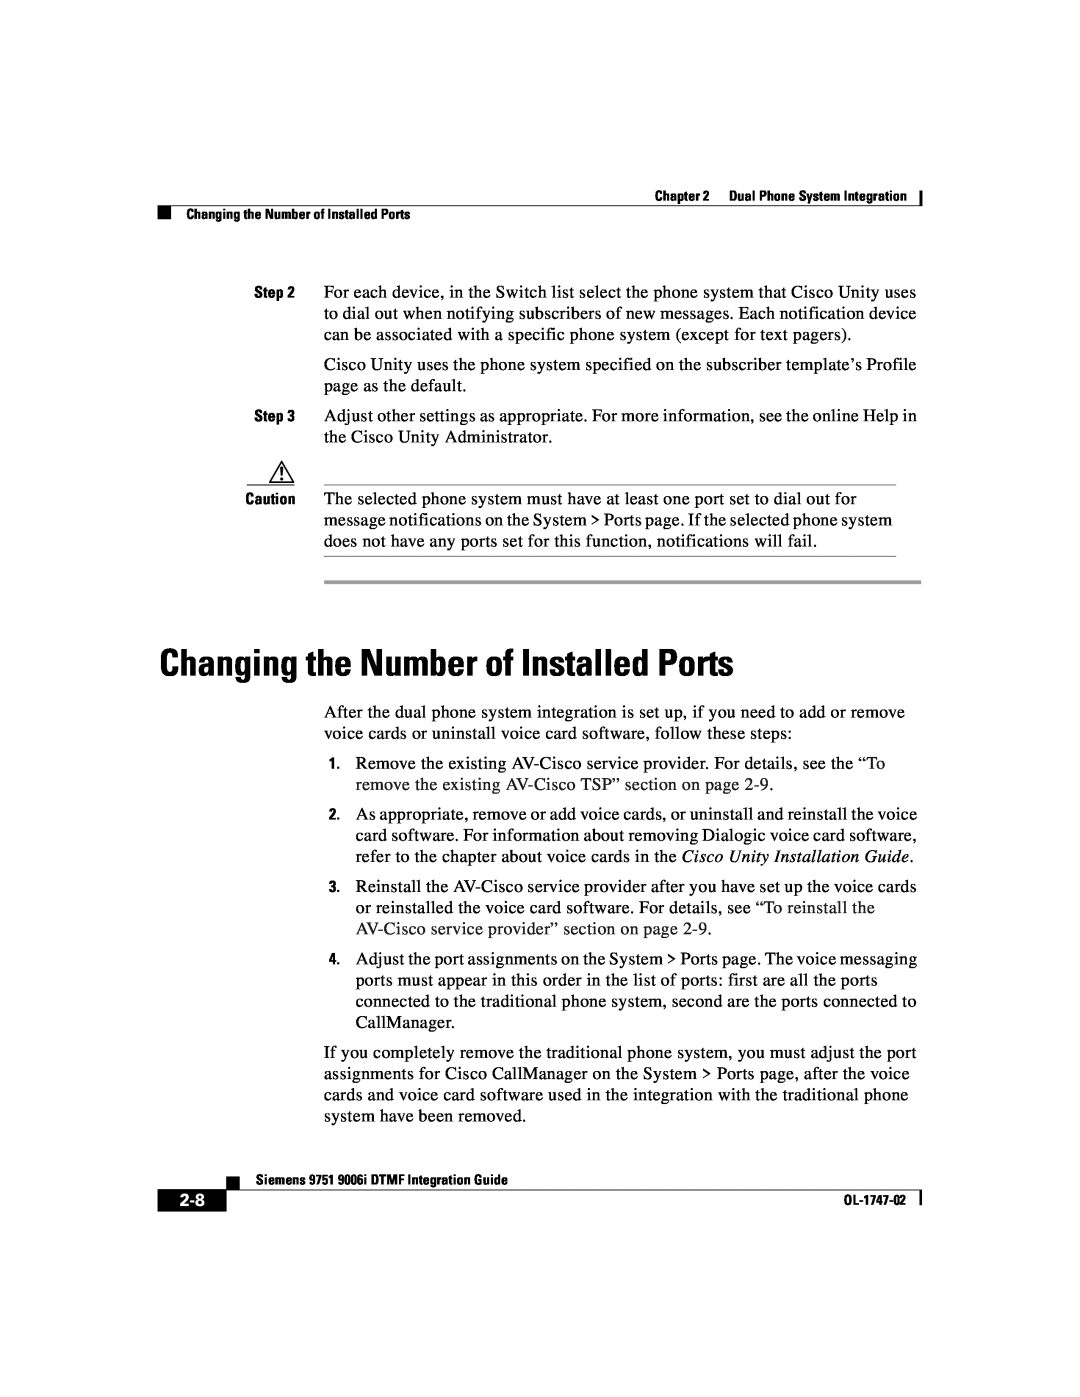 Able Planet OL-1747-02 manual Changing the Number of Installed Ports, Dual Phone System Integration 